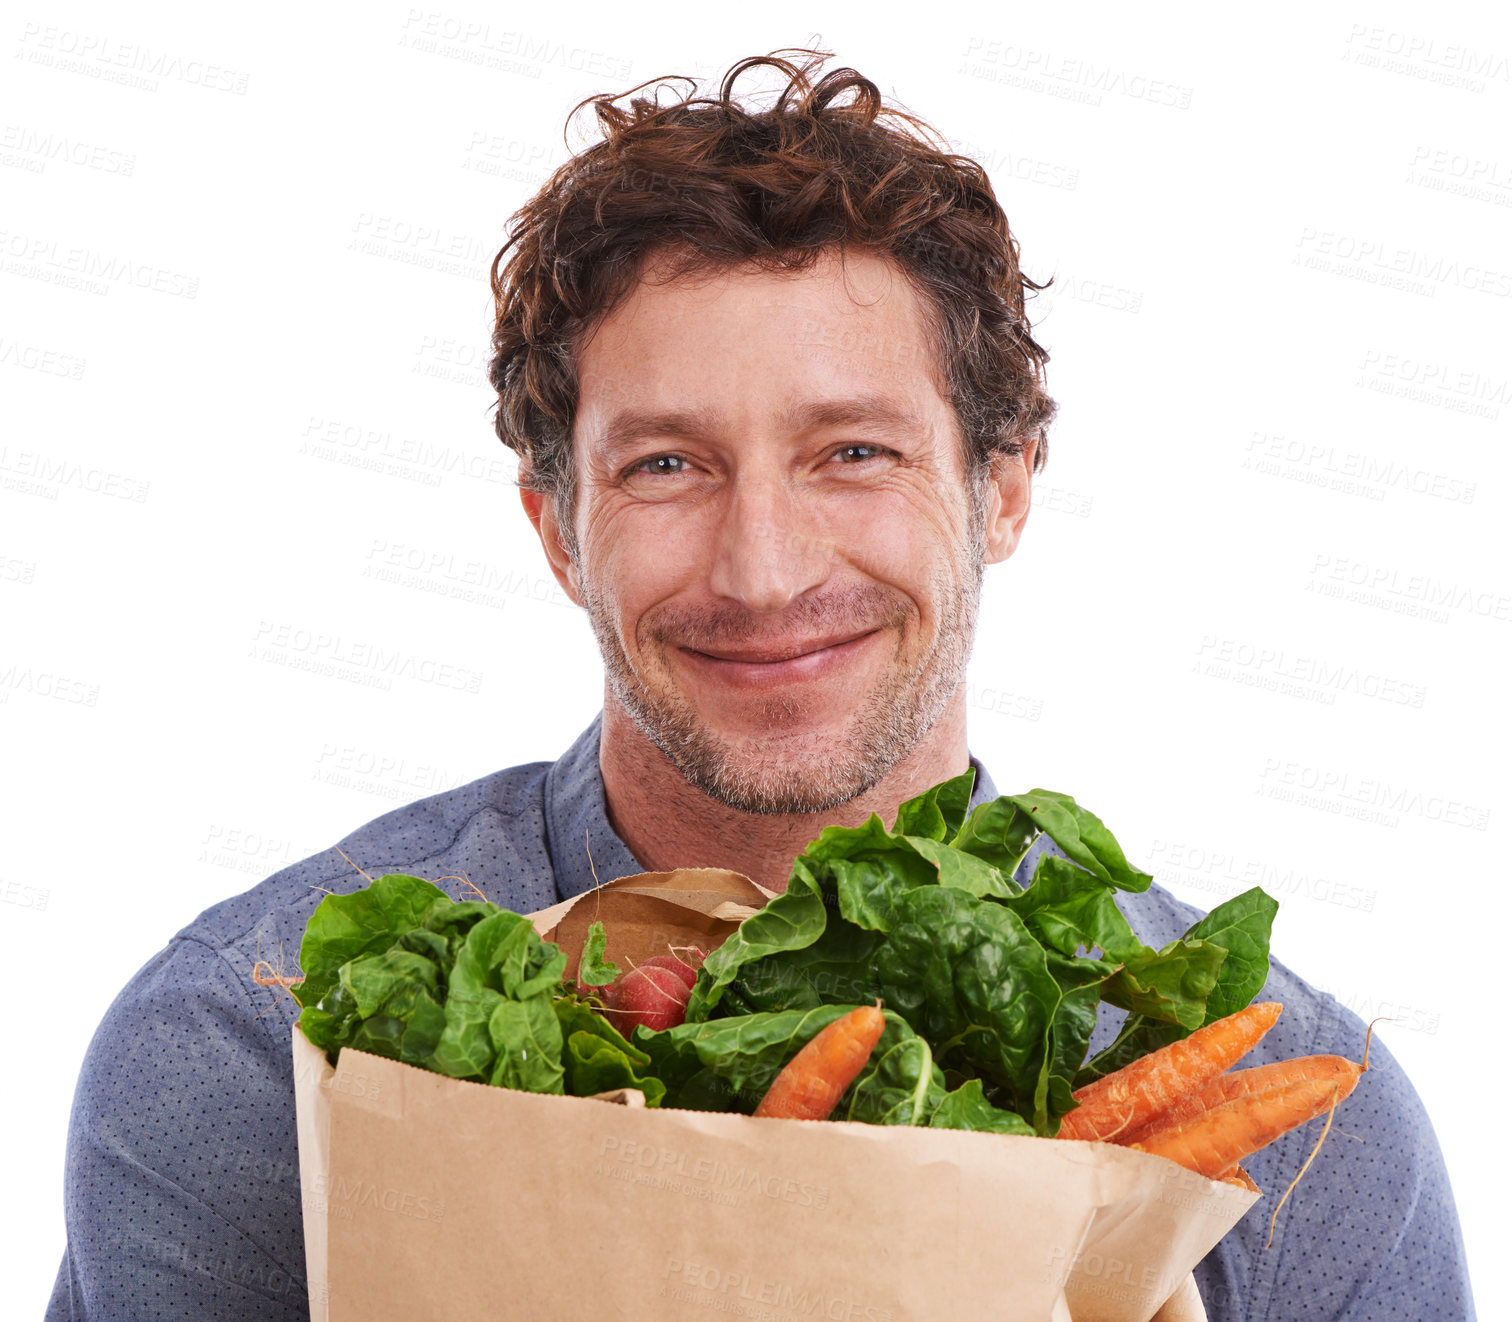 Buy stock photo Studio, happy and portrait of man with groceries on promotion, sale or discounts deal on nutrition. Smile, delivery offer and male person with healthy food for cooking, organic fruits or diet choice